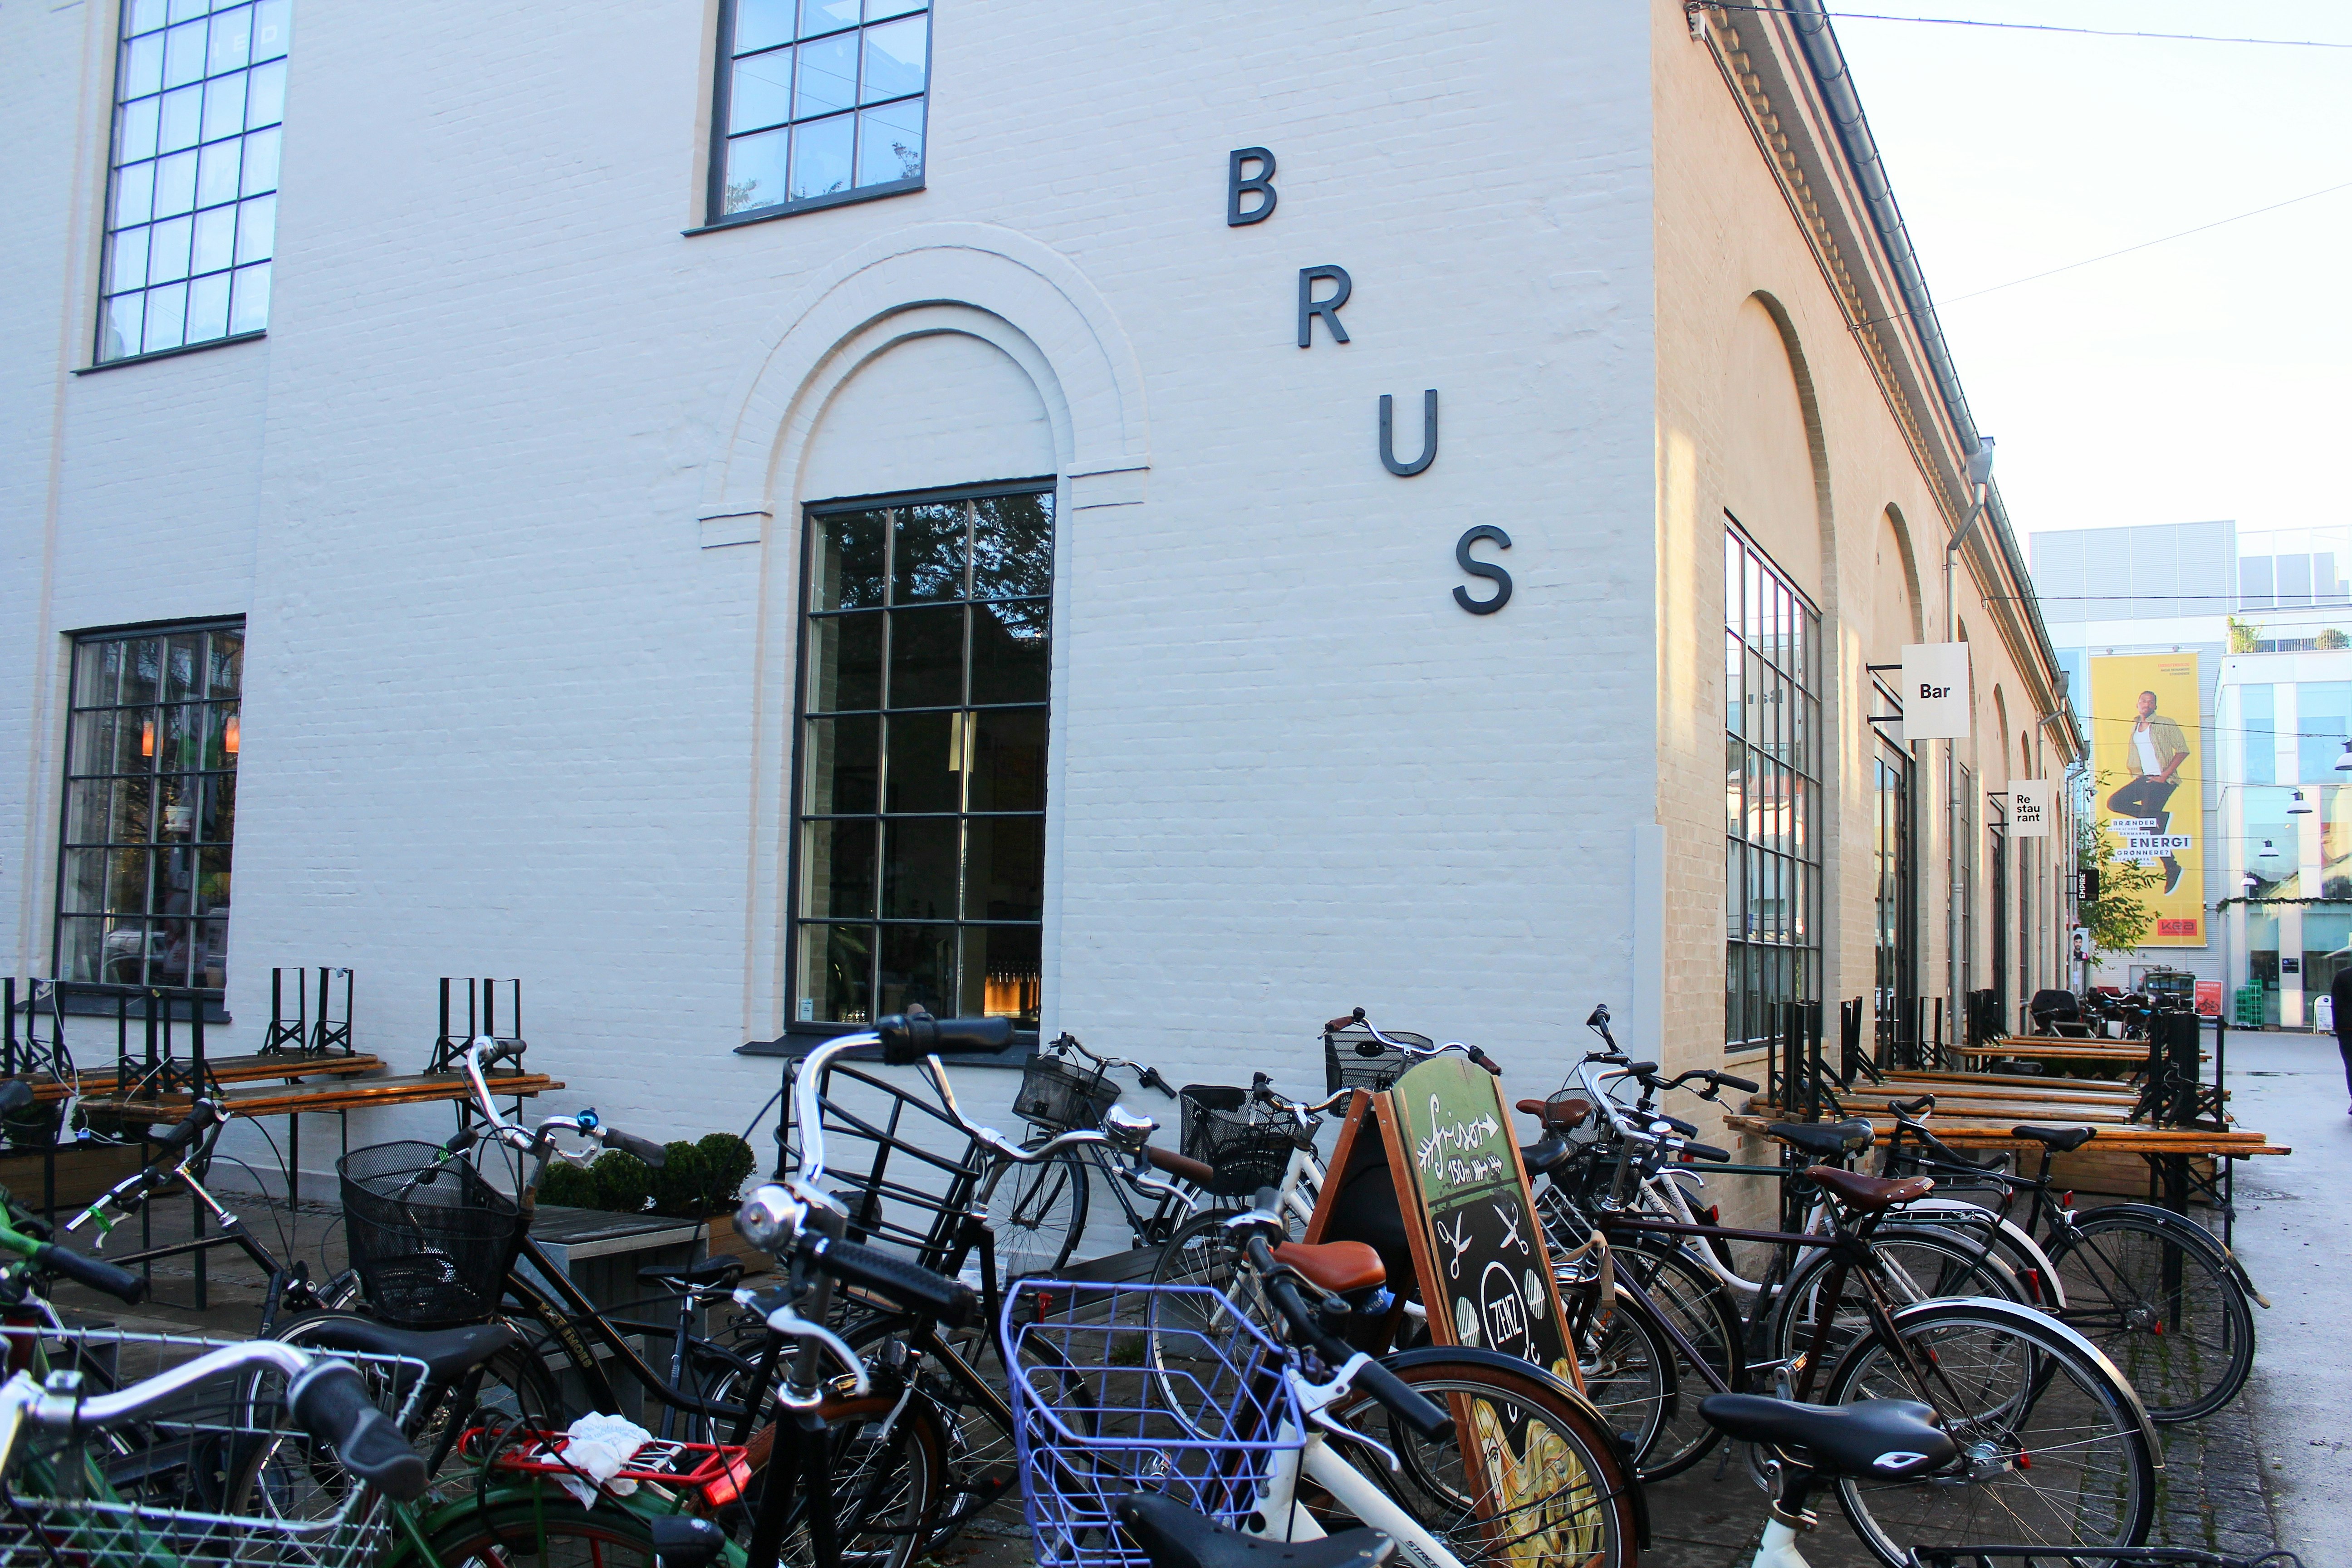 The exterior of Brus microbrewery in Copenhagen; many bikes are parked outside the simple whitewashed building that has 'BRUS' spelled out in individual letters on the side.